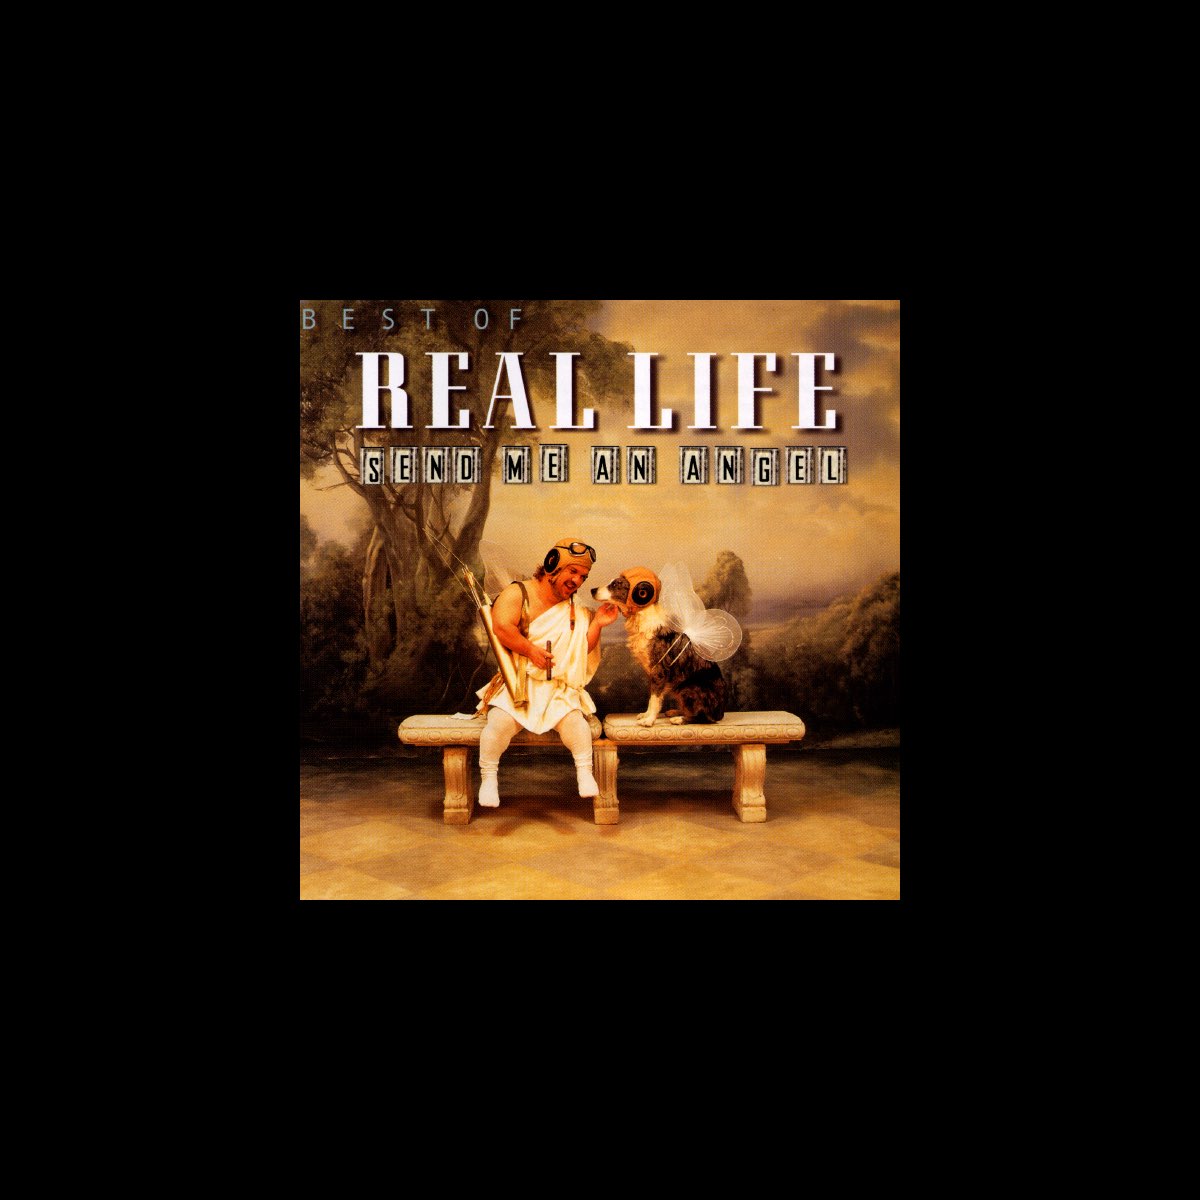 Best of Real Life - Send Me an Angel - Album by Real Life - Apple Music